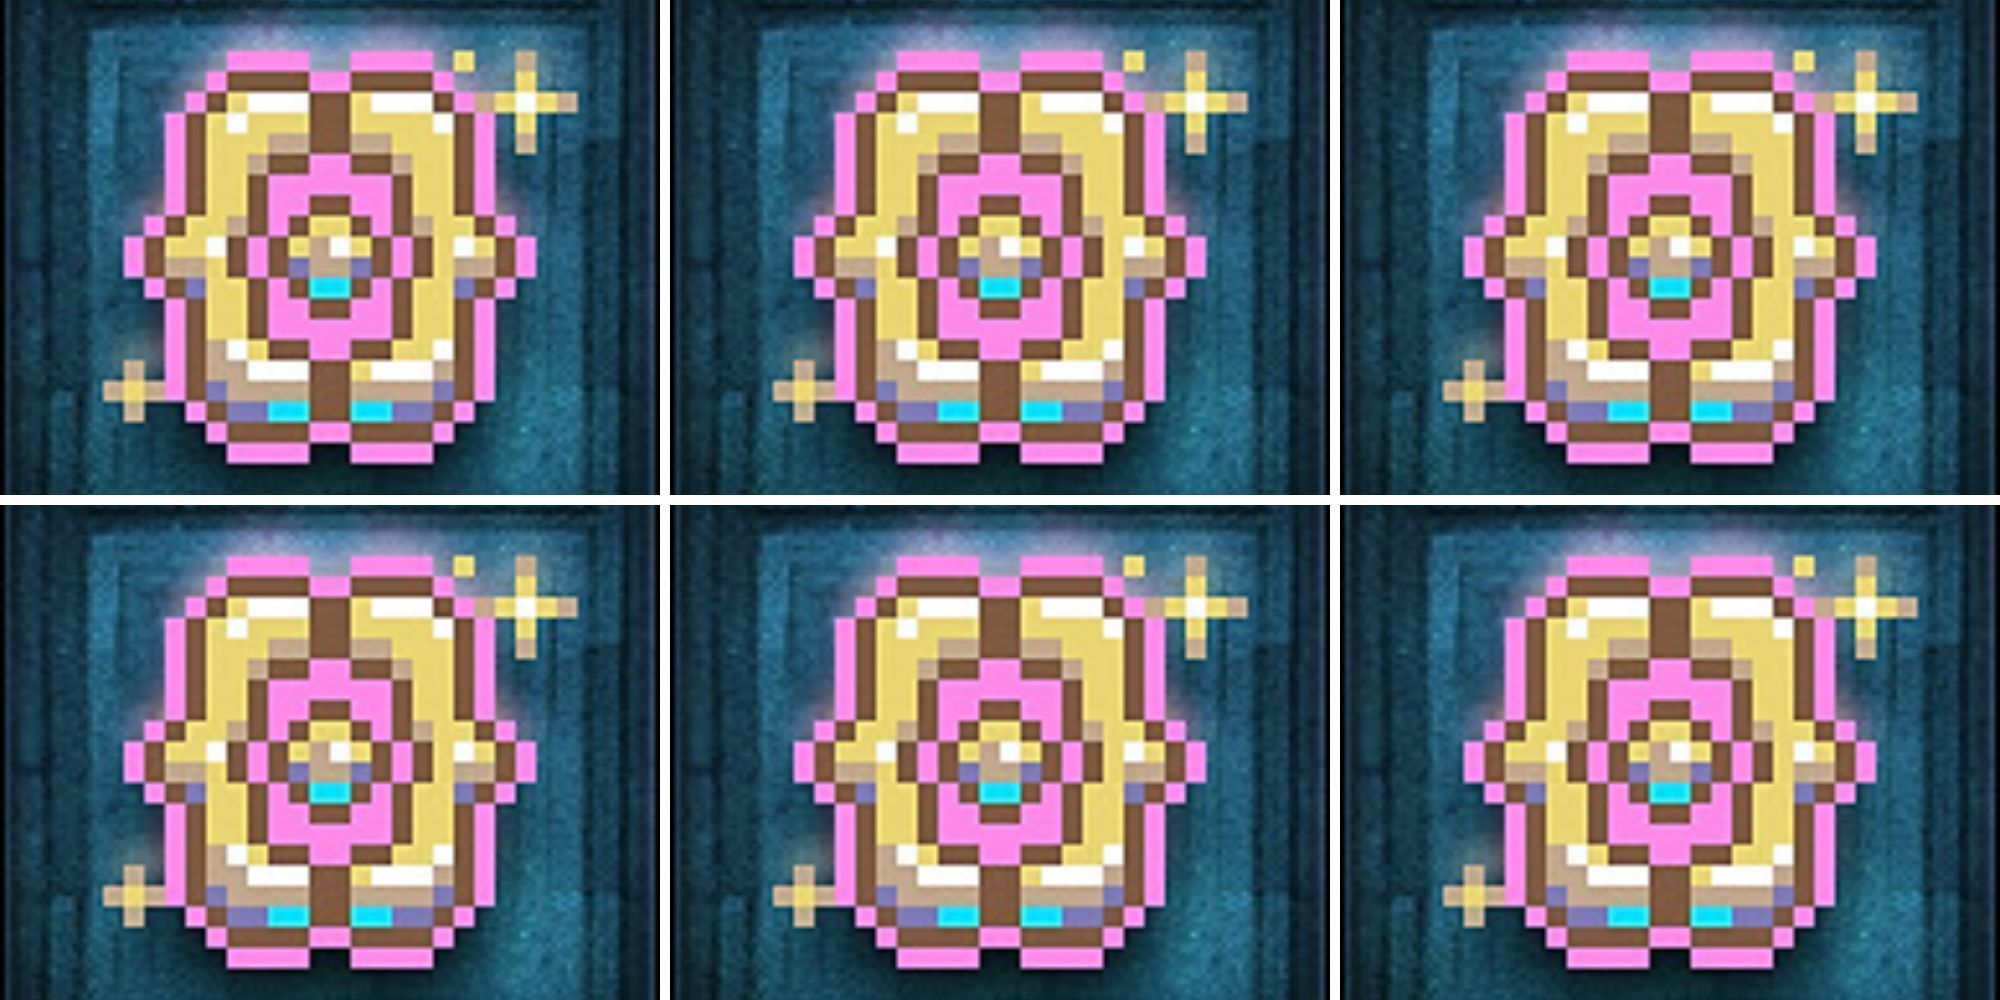 Repeating yellow and pink Pebcakes achievement icon pattern.